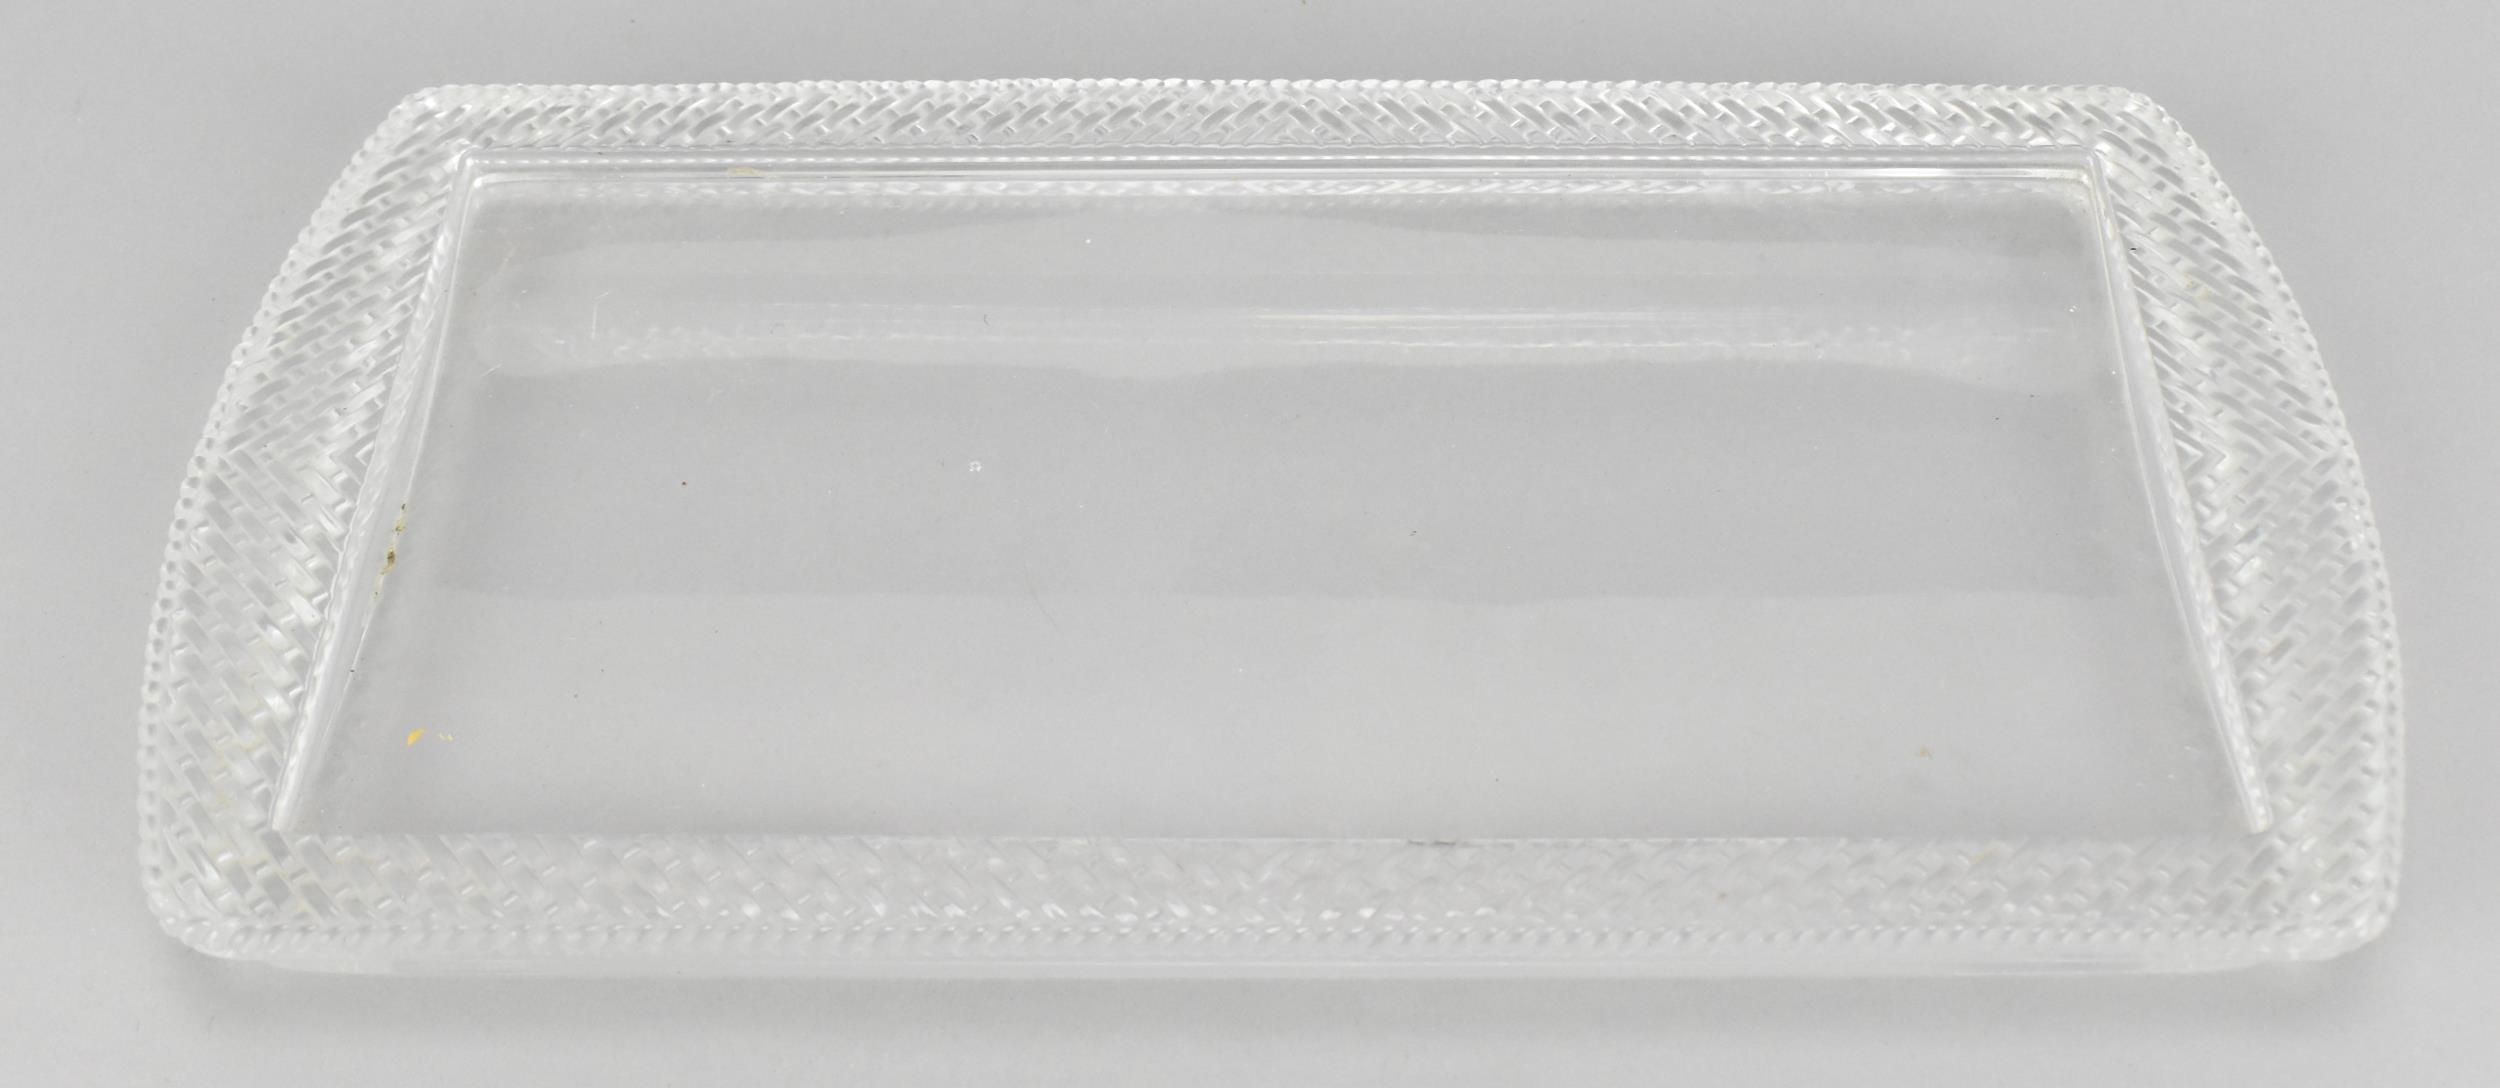 A Lalique clear glass rectangular tray, post 1980, with woven pattern border, the underside with - Image 2 of 7